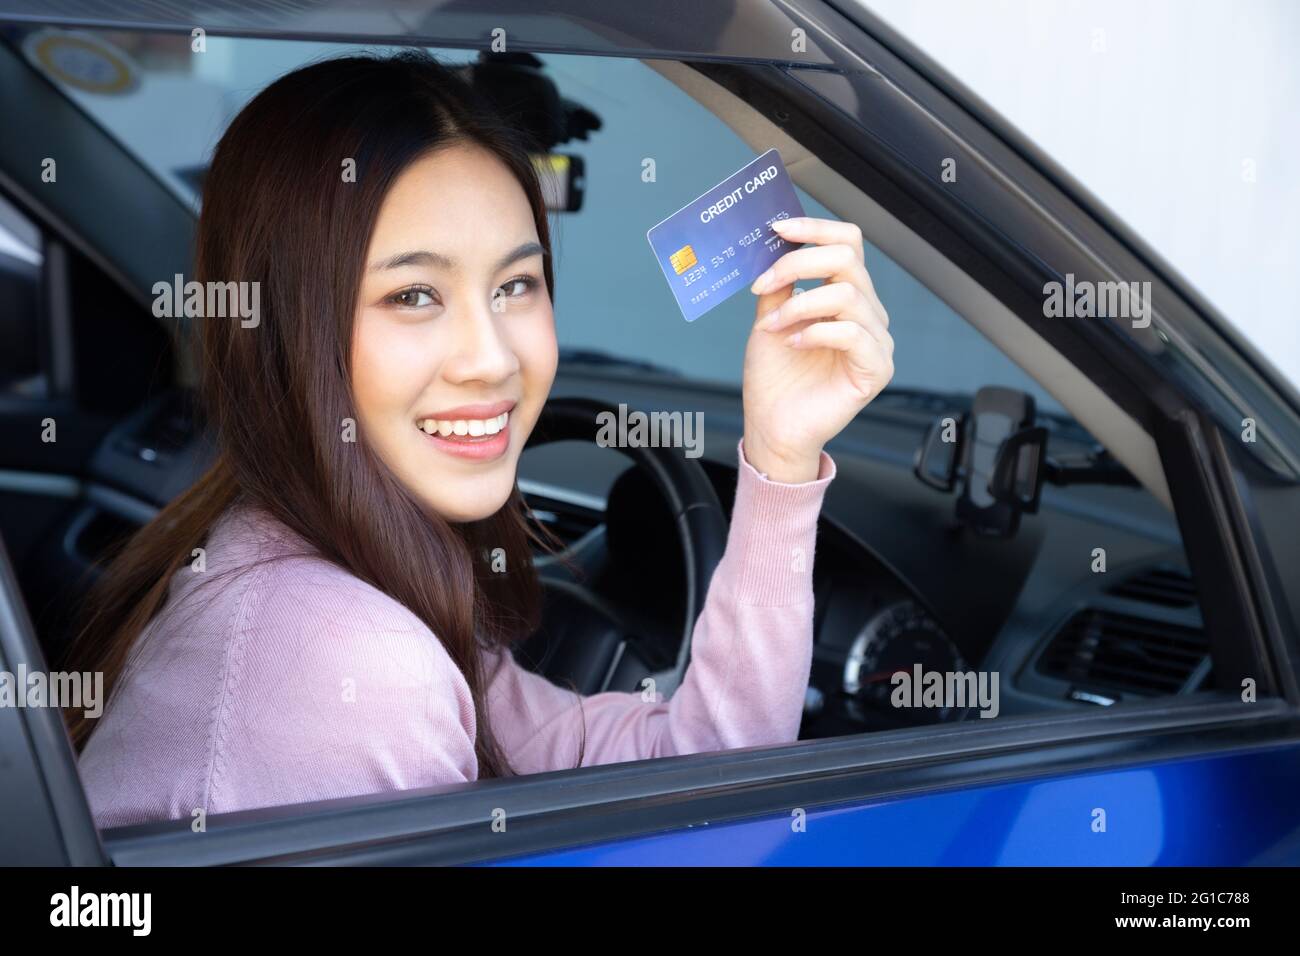 Happy beautiful Asian woman sitting inside new car blue and showing credit card pay for oil, pay a tire, maintenance on the garage, Make payment for r Stock Photo